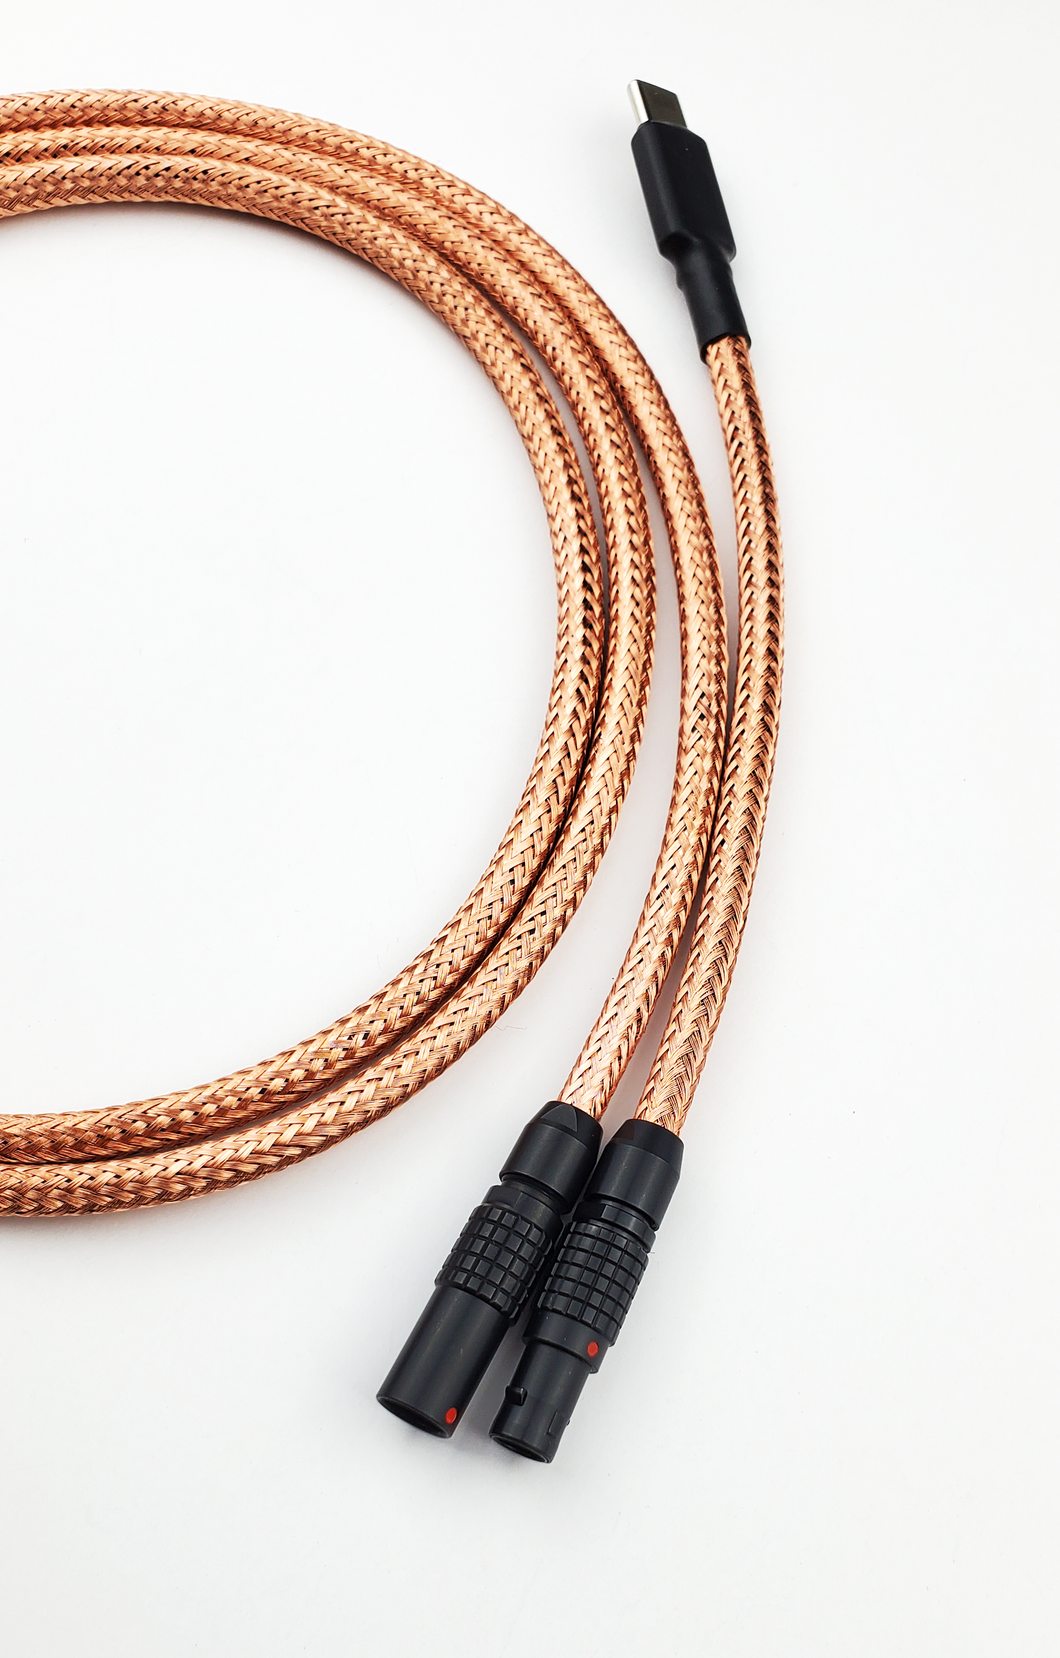 Fully Copper Sleeved // straight cable // Black premium push/pull